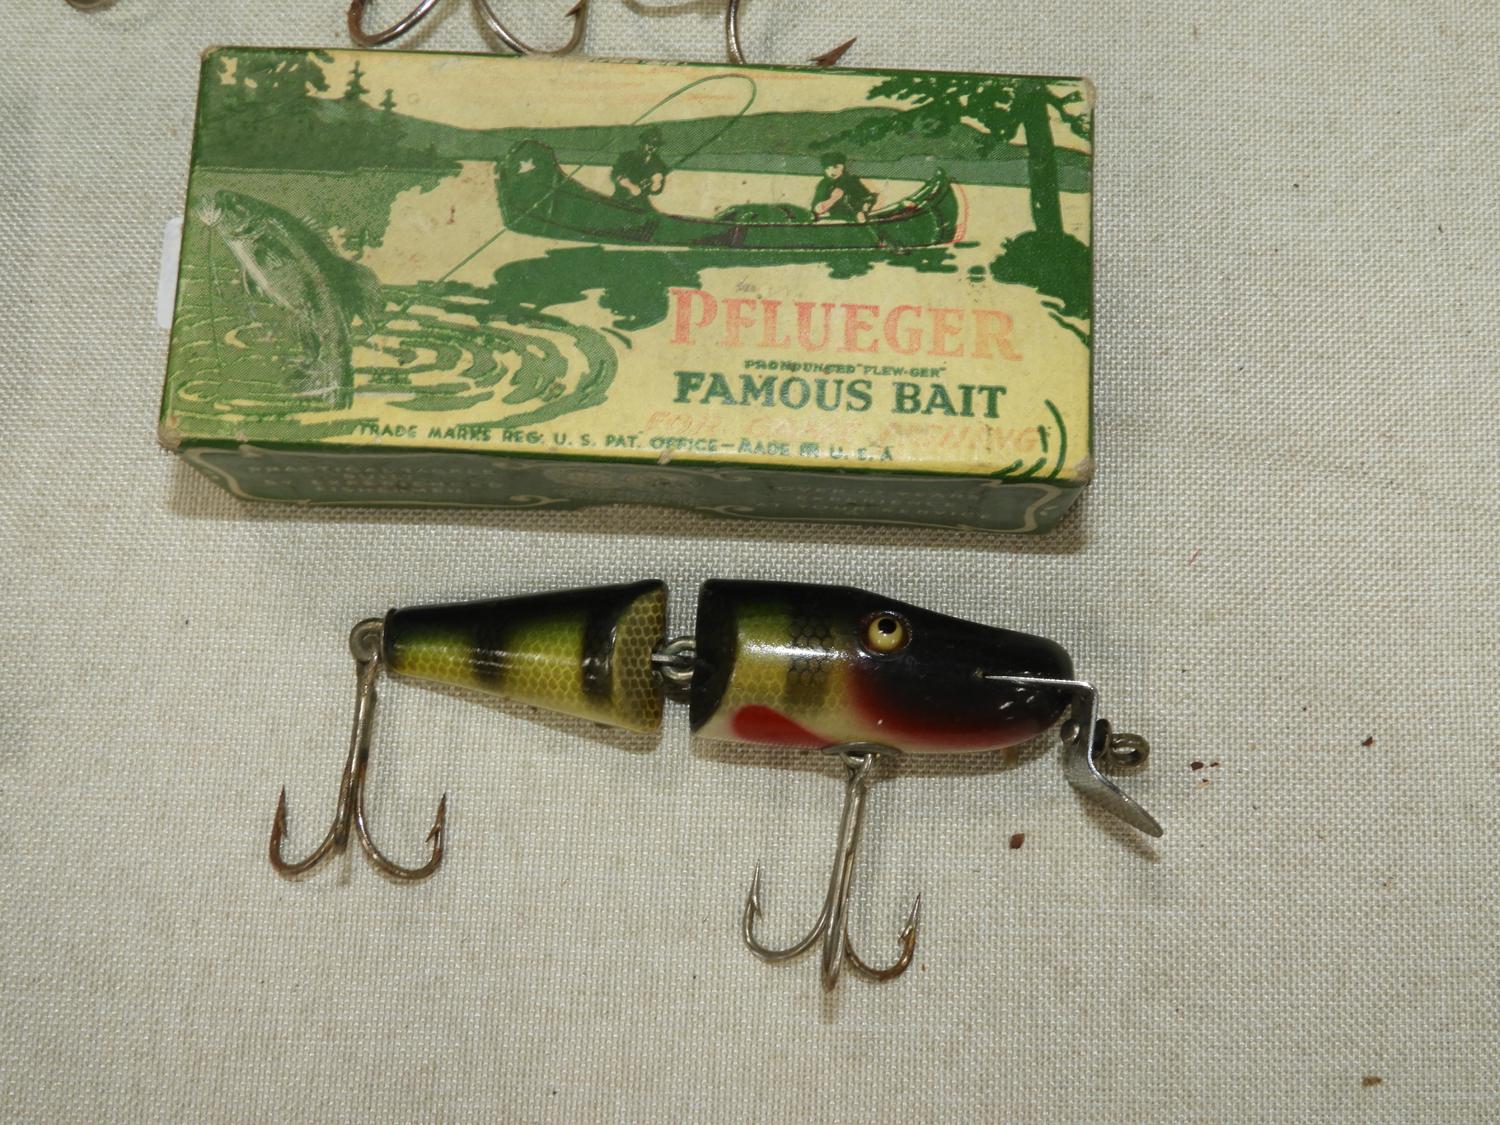 Murrays Auctioneers - Lot 266: Four vintage jointed fishing lures including  Creek Chub Bait Co. of Garrett